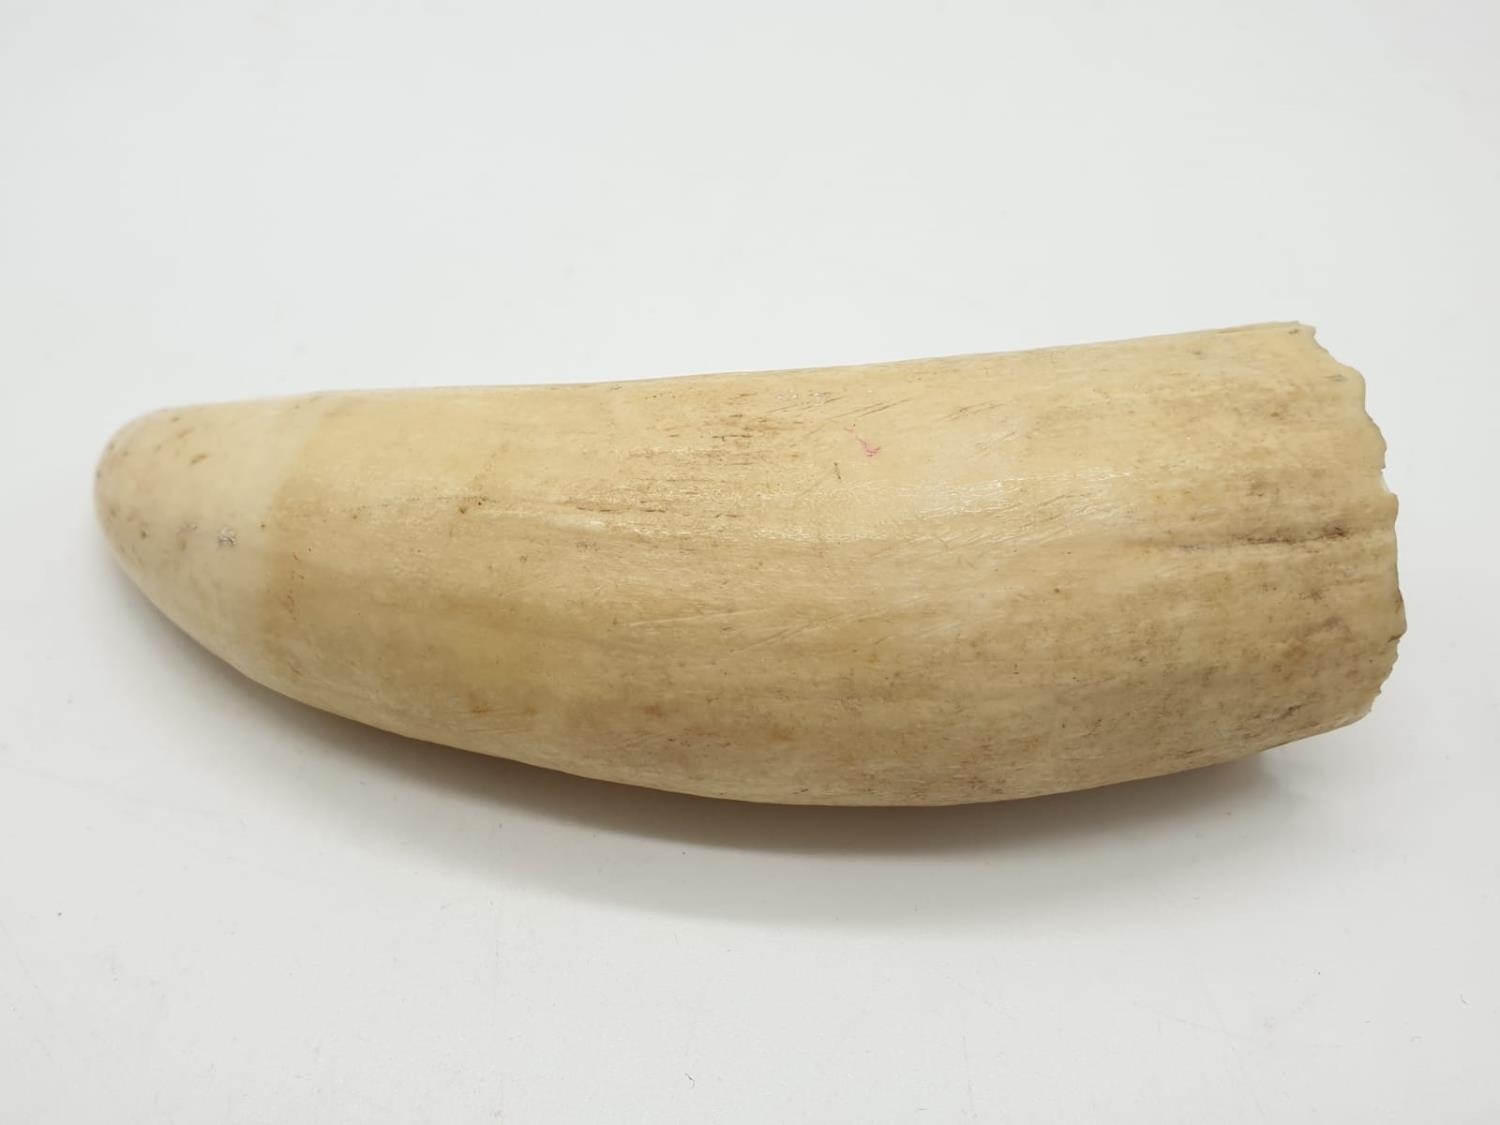 Vintage walrus tusk, 177g weight and 14cm long approx - Image 5 of 6